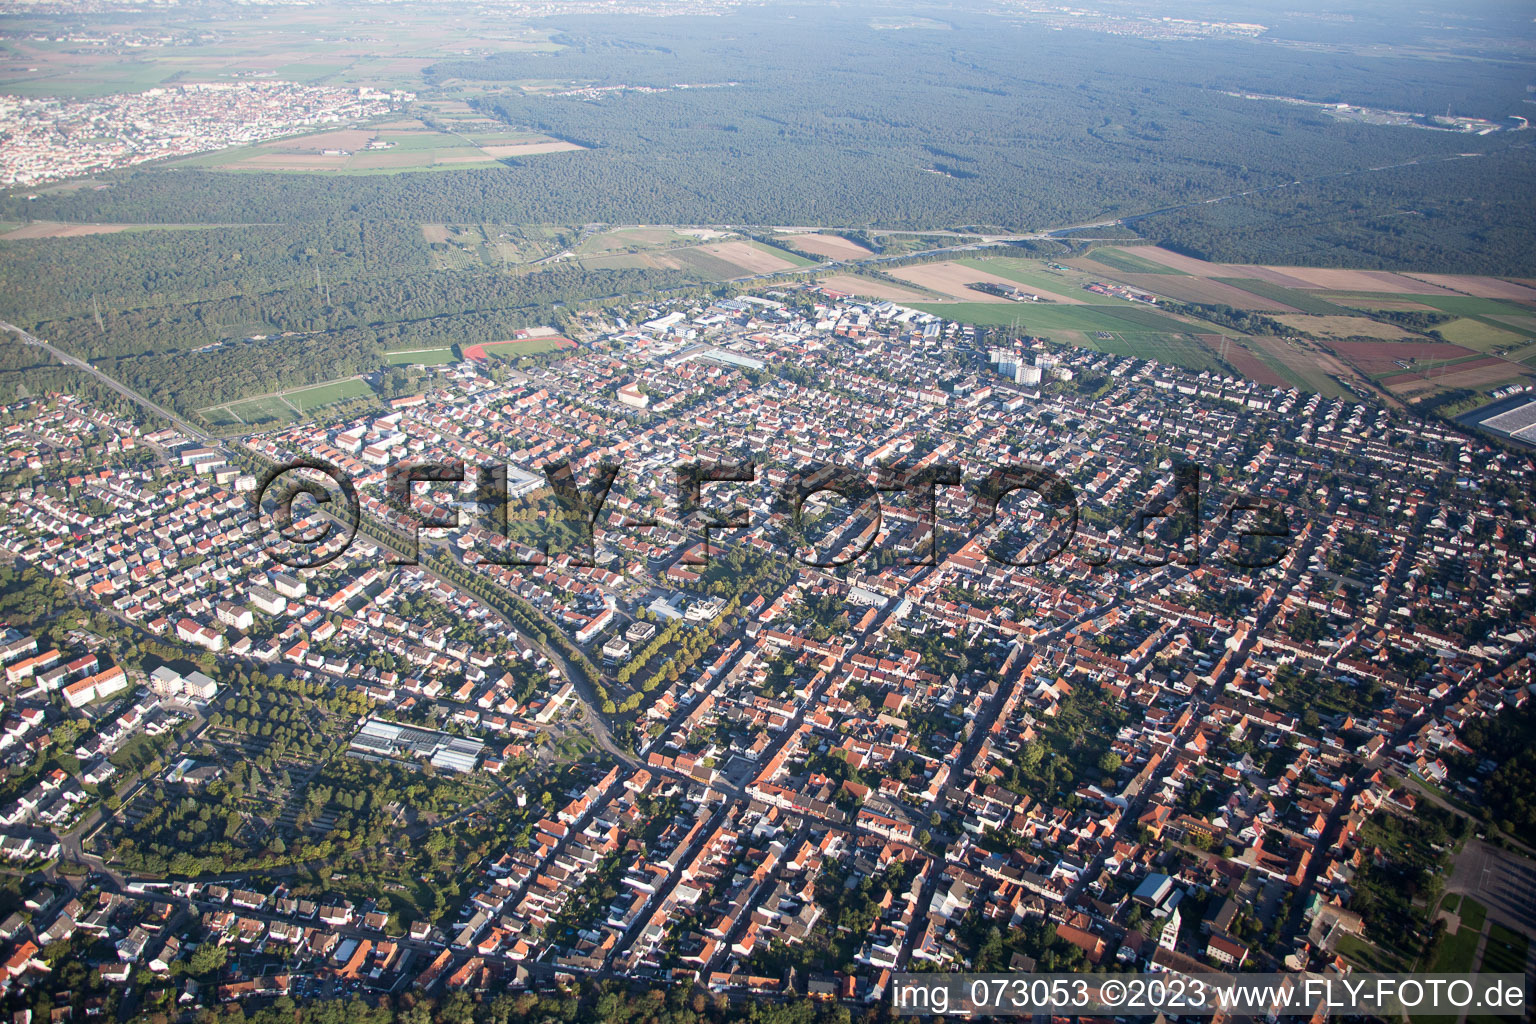 Ketsch in the state Baden-Wuerttemberg, Germany from the drone perspective